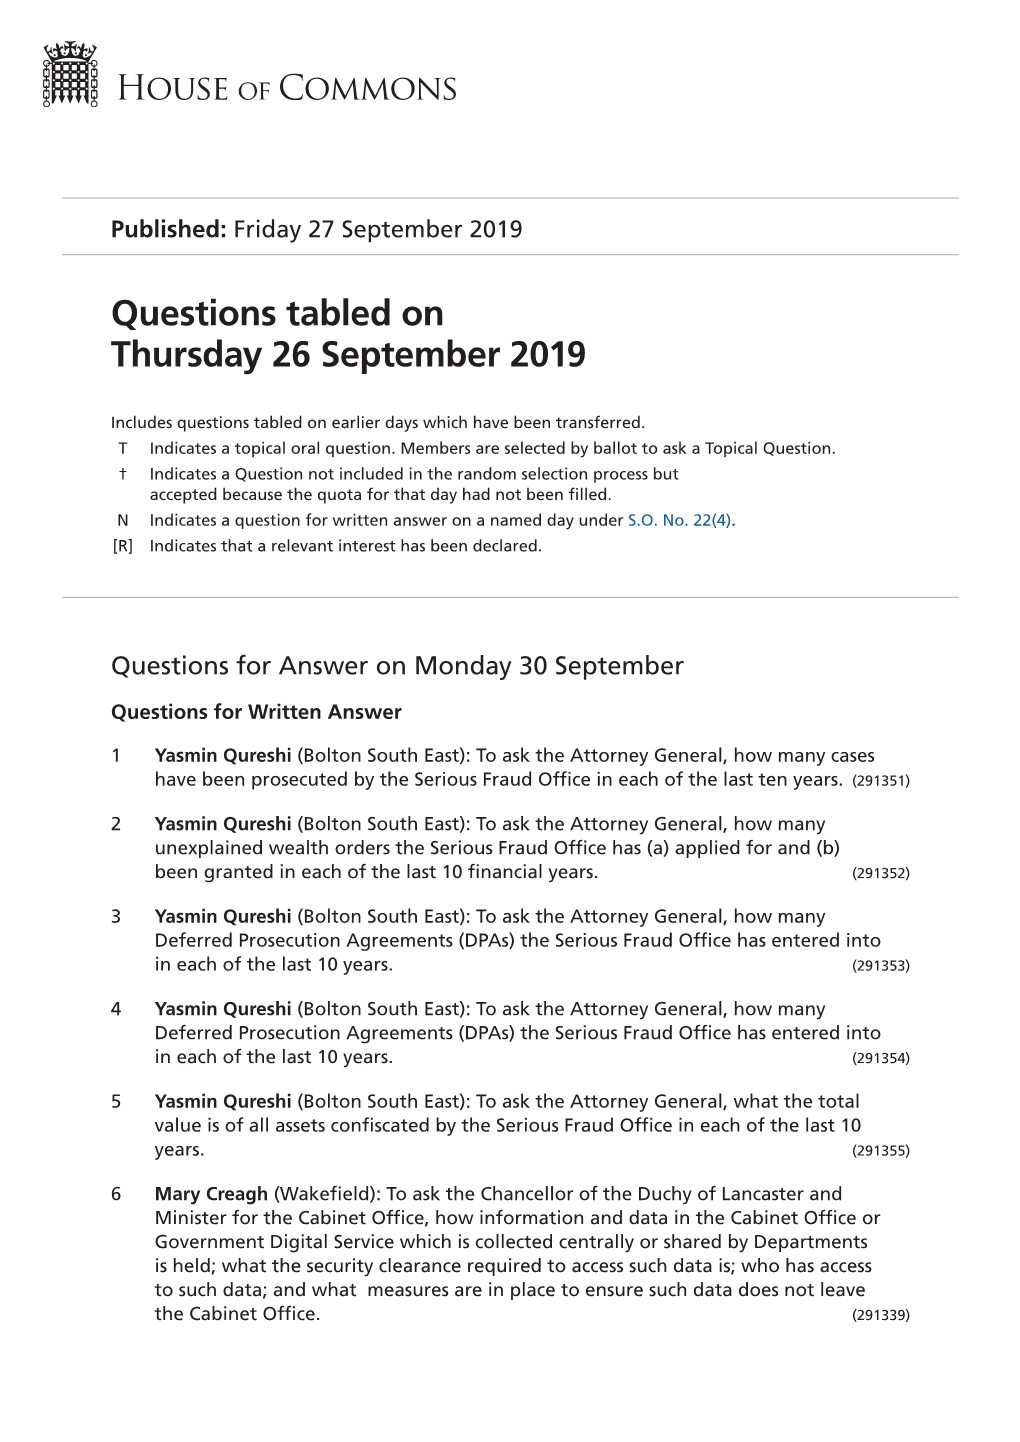 Questions Tabled on Thu 26 Sep 2019